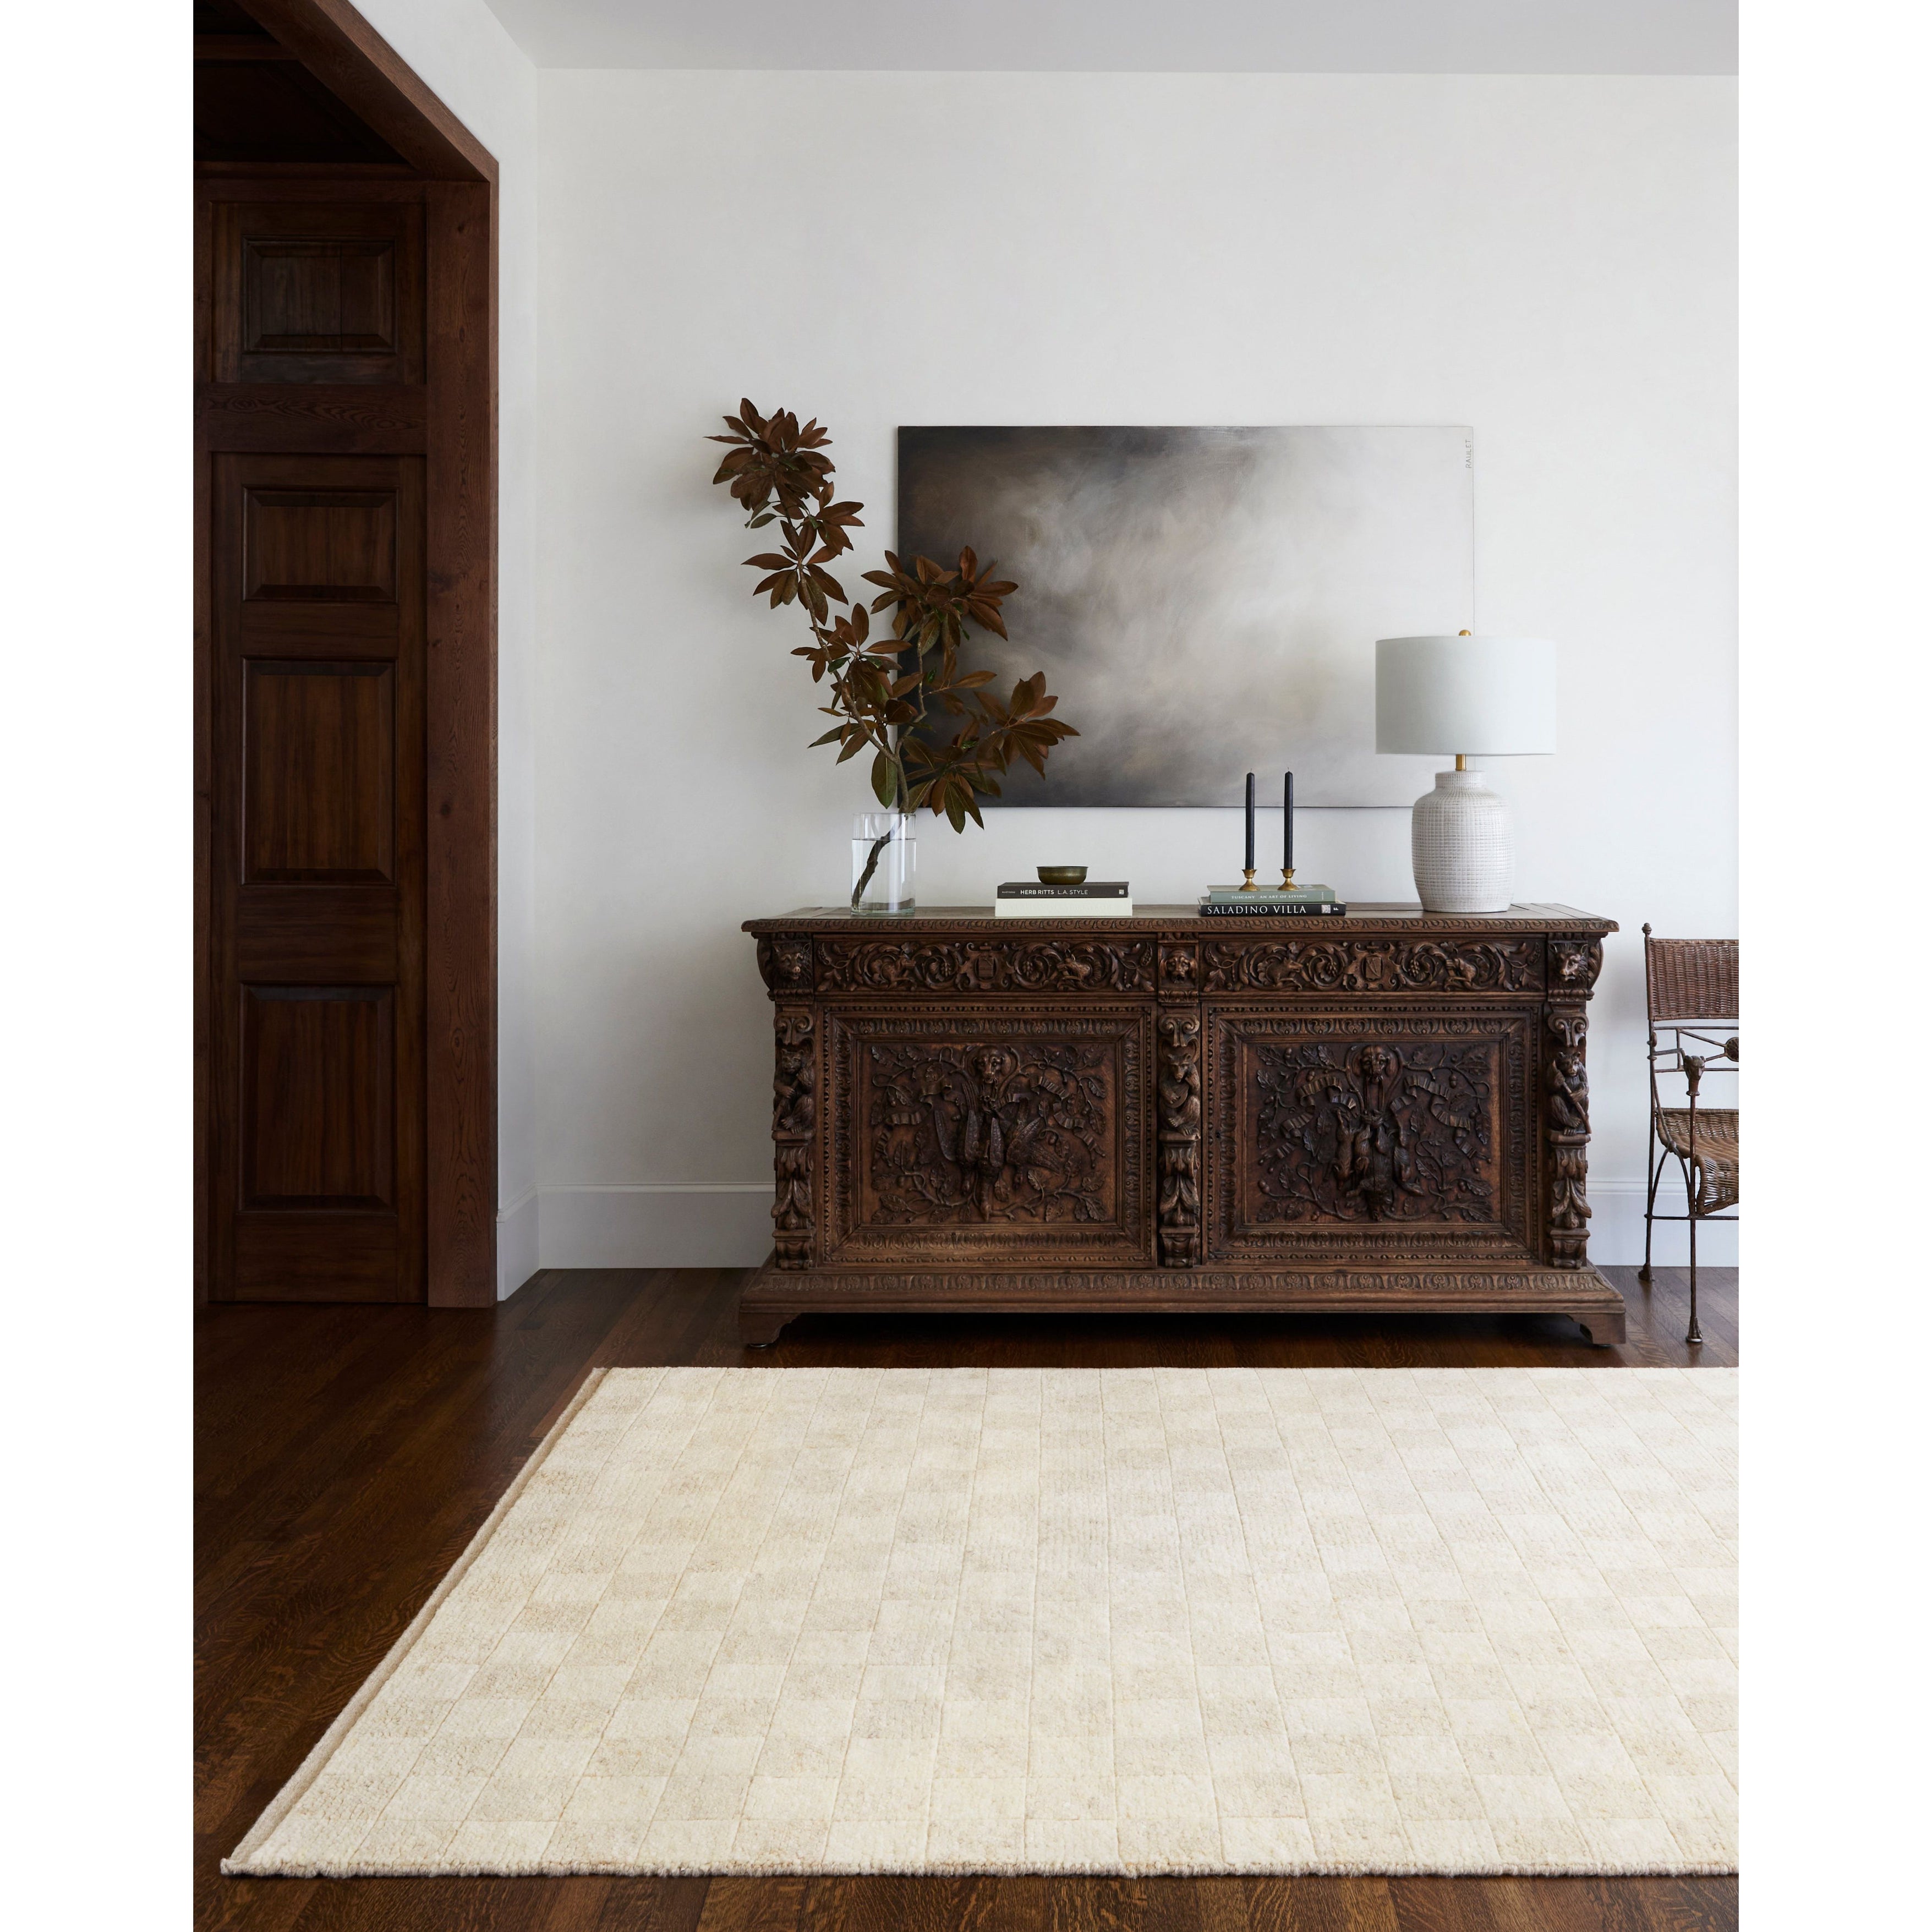 100% Wool Amethyst Home provides interior design, new home construction design consulting, vintage area rugs, and lighting in the Boston metro area.